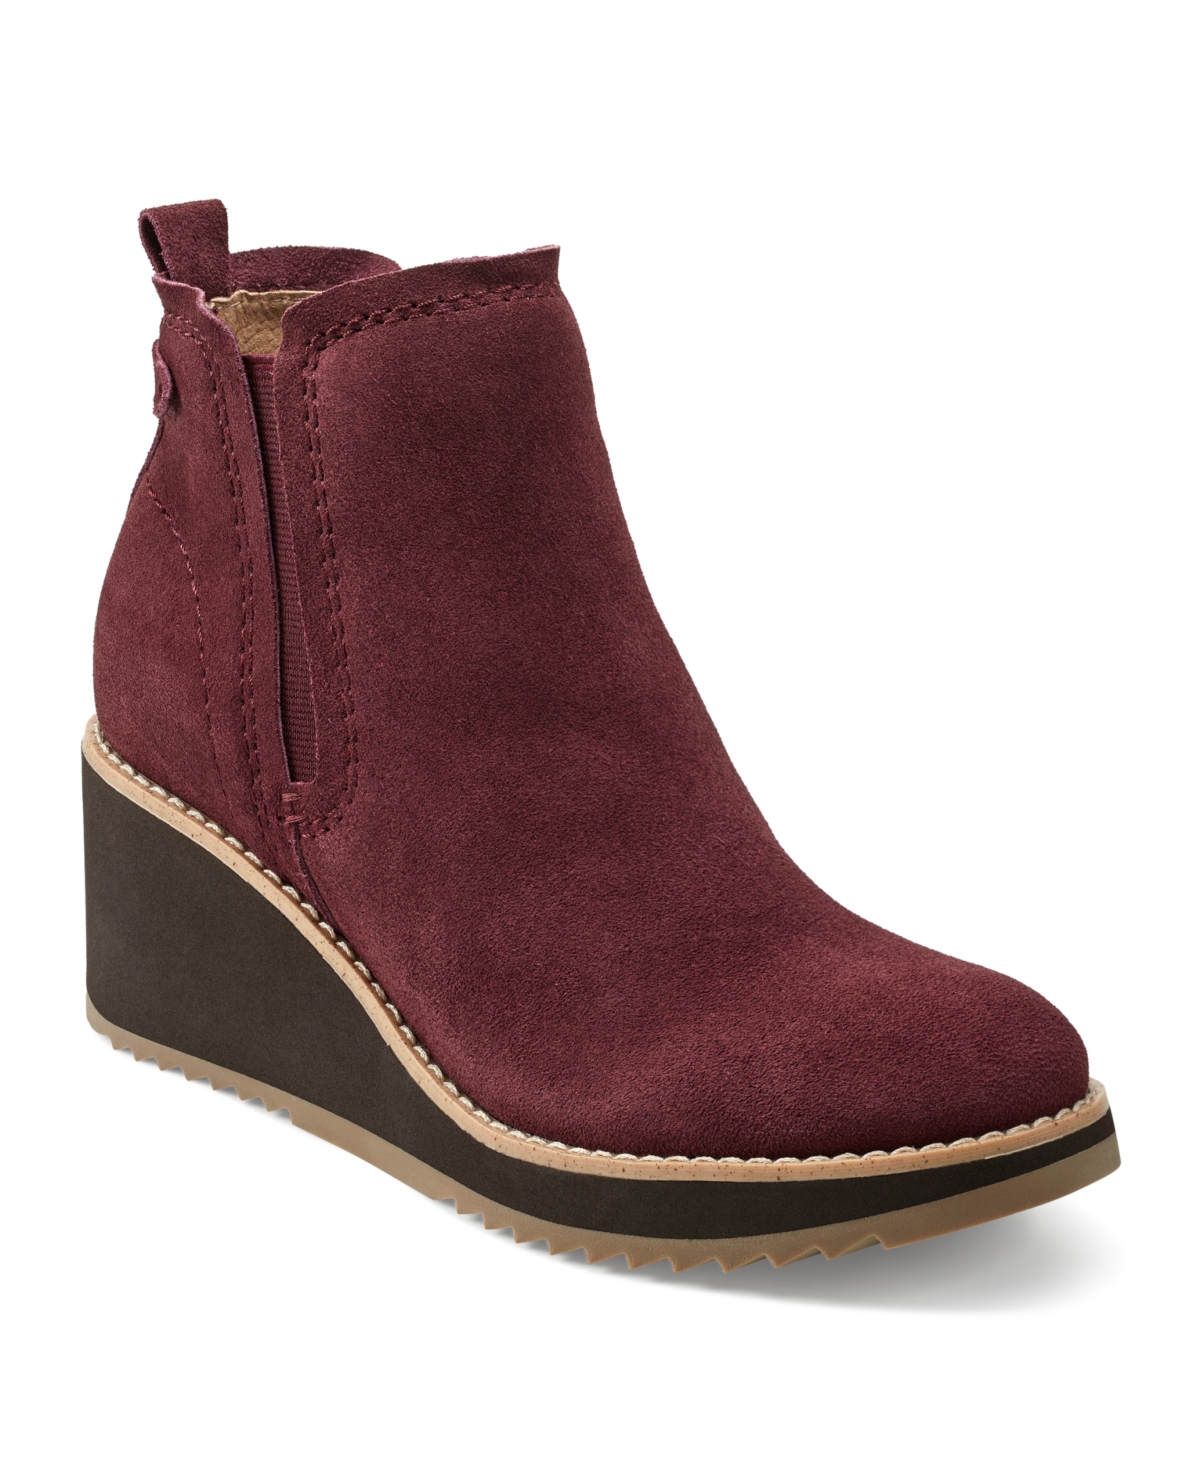 Earth Women's Cleia Slip-on Round Toe Casual Wedge Booties In Dark Red Suede